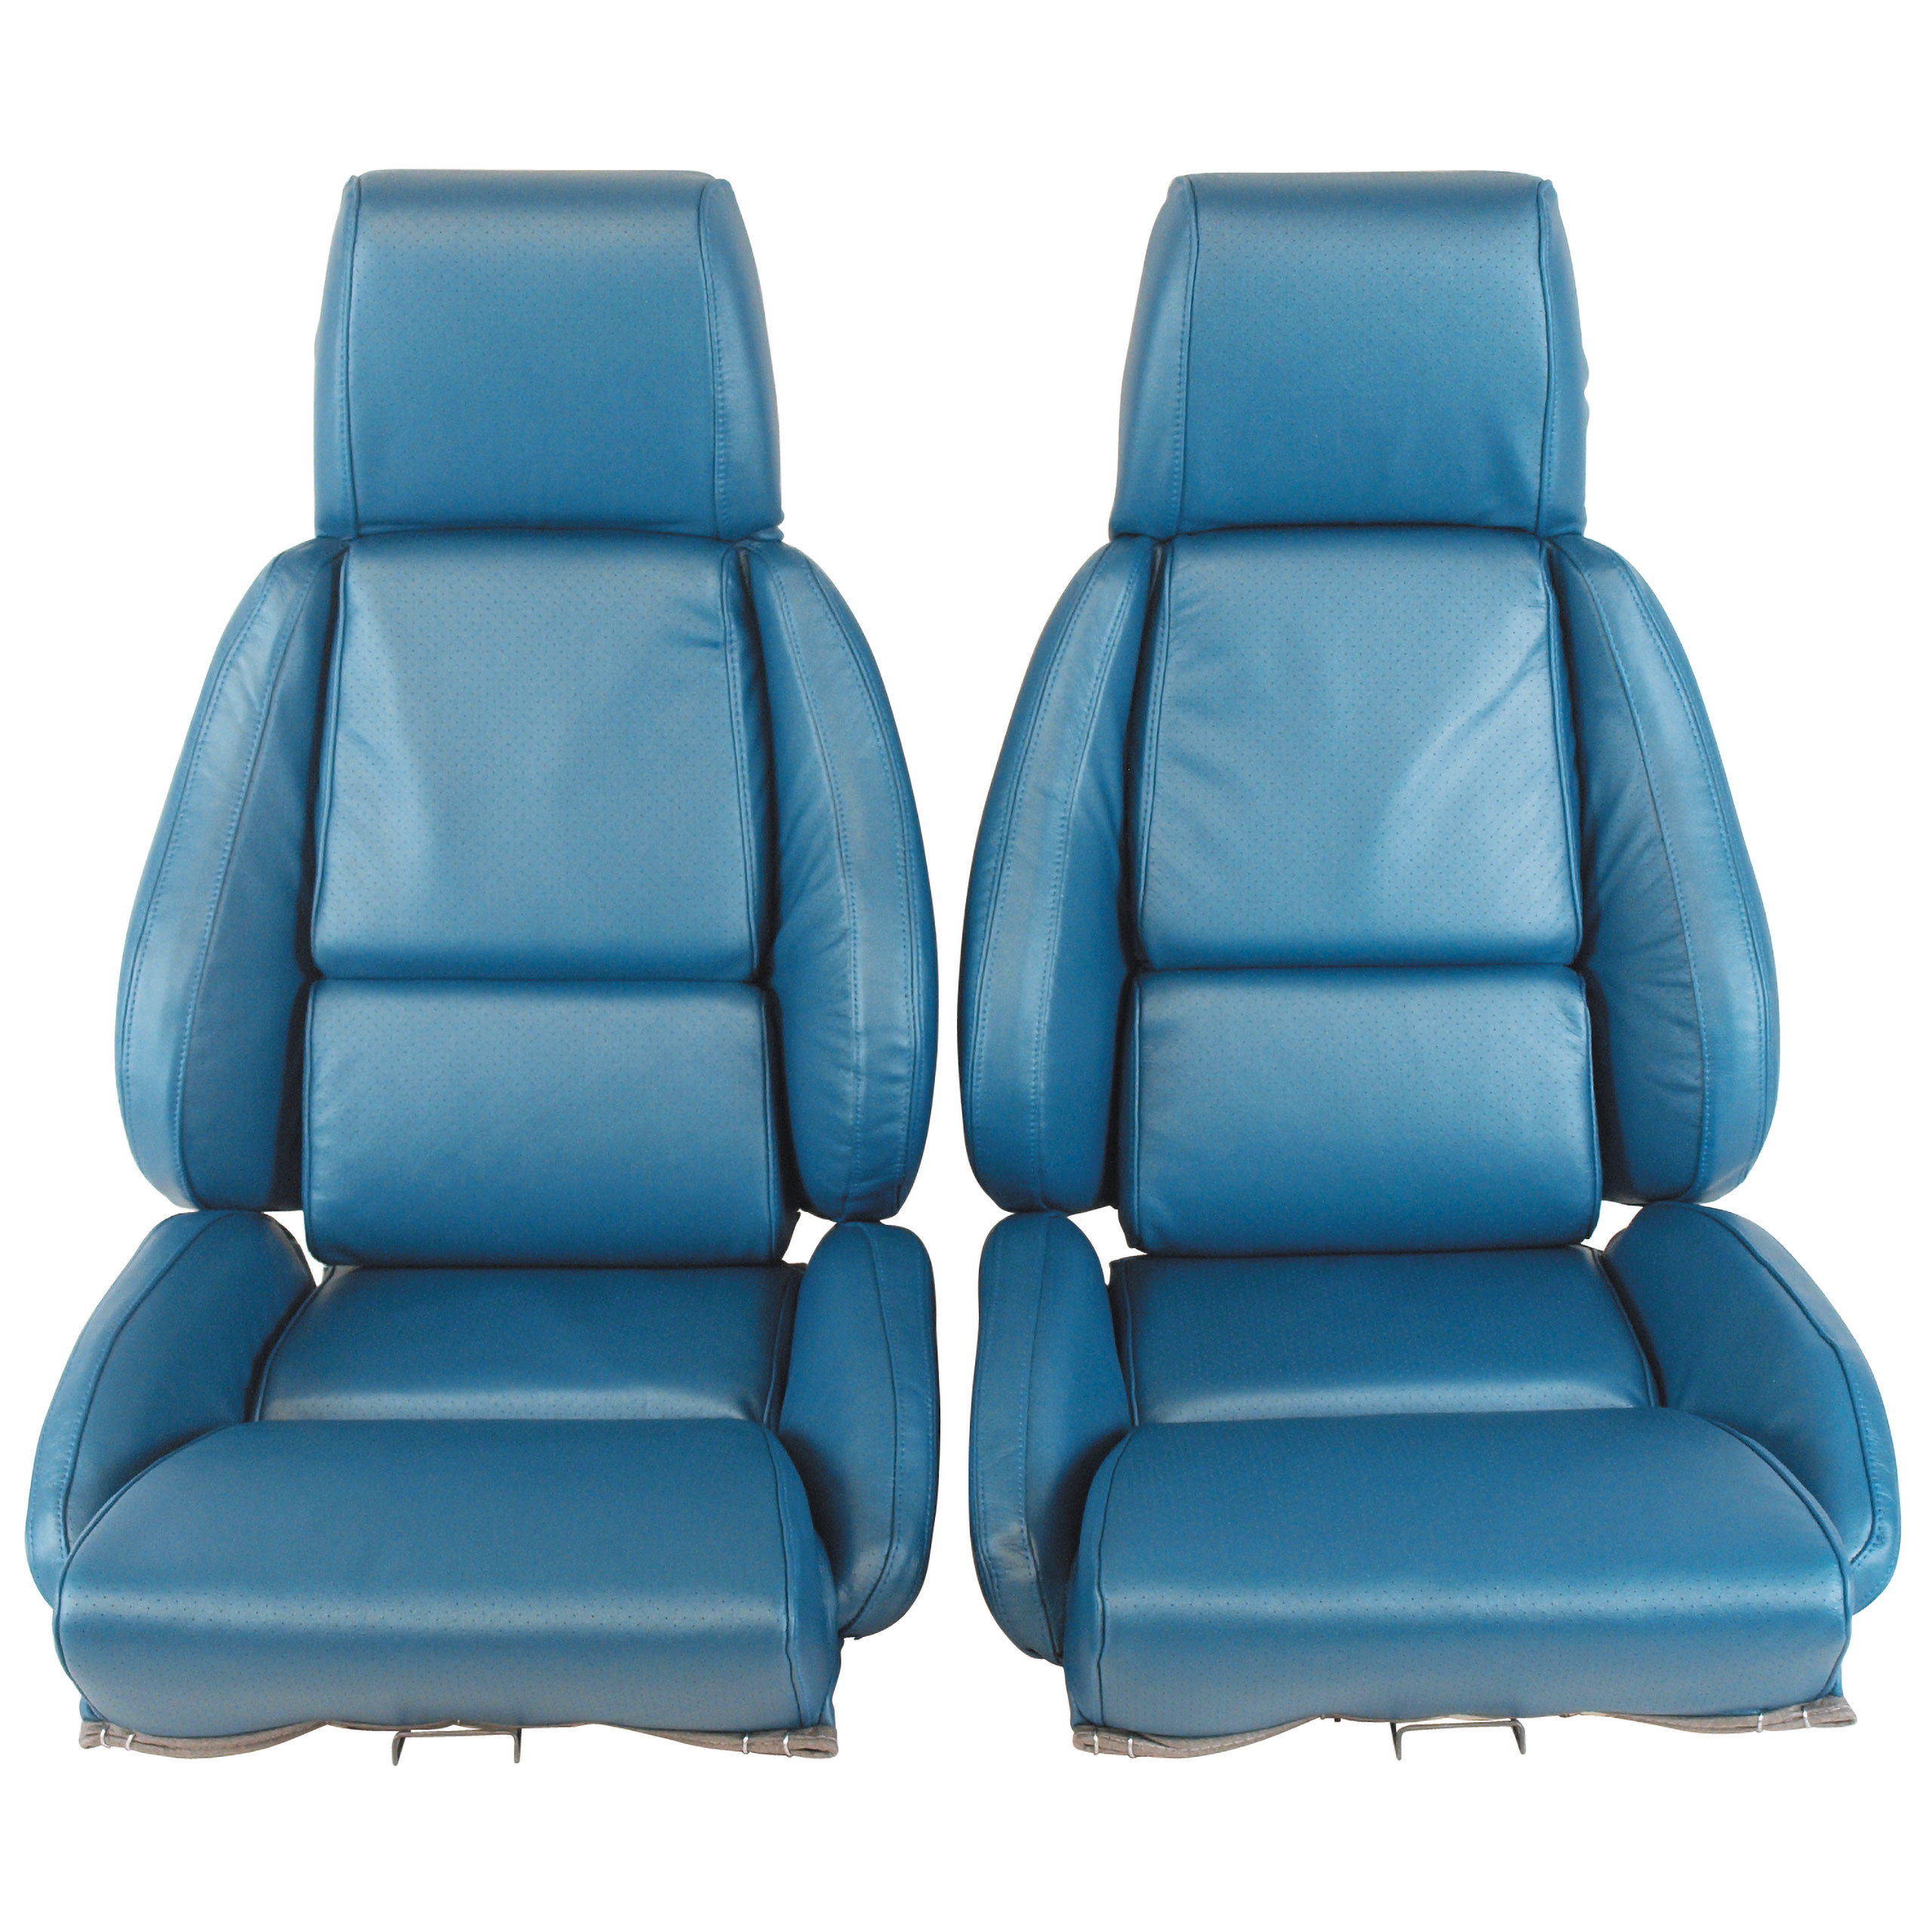 1986-1988 C4 Corvette Mounted Leather Seat Covers Blue Standard